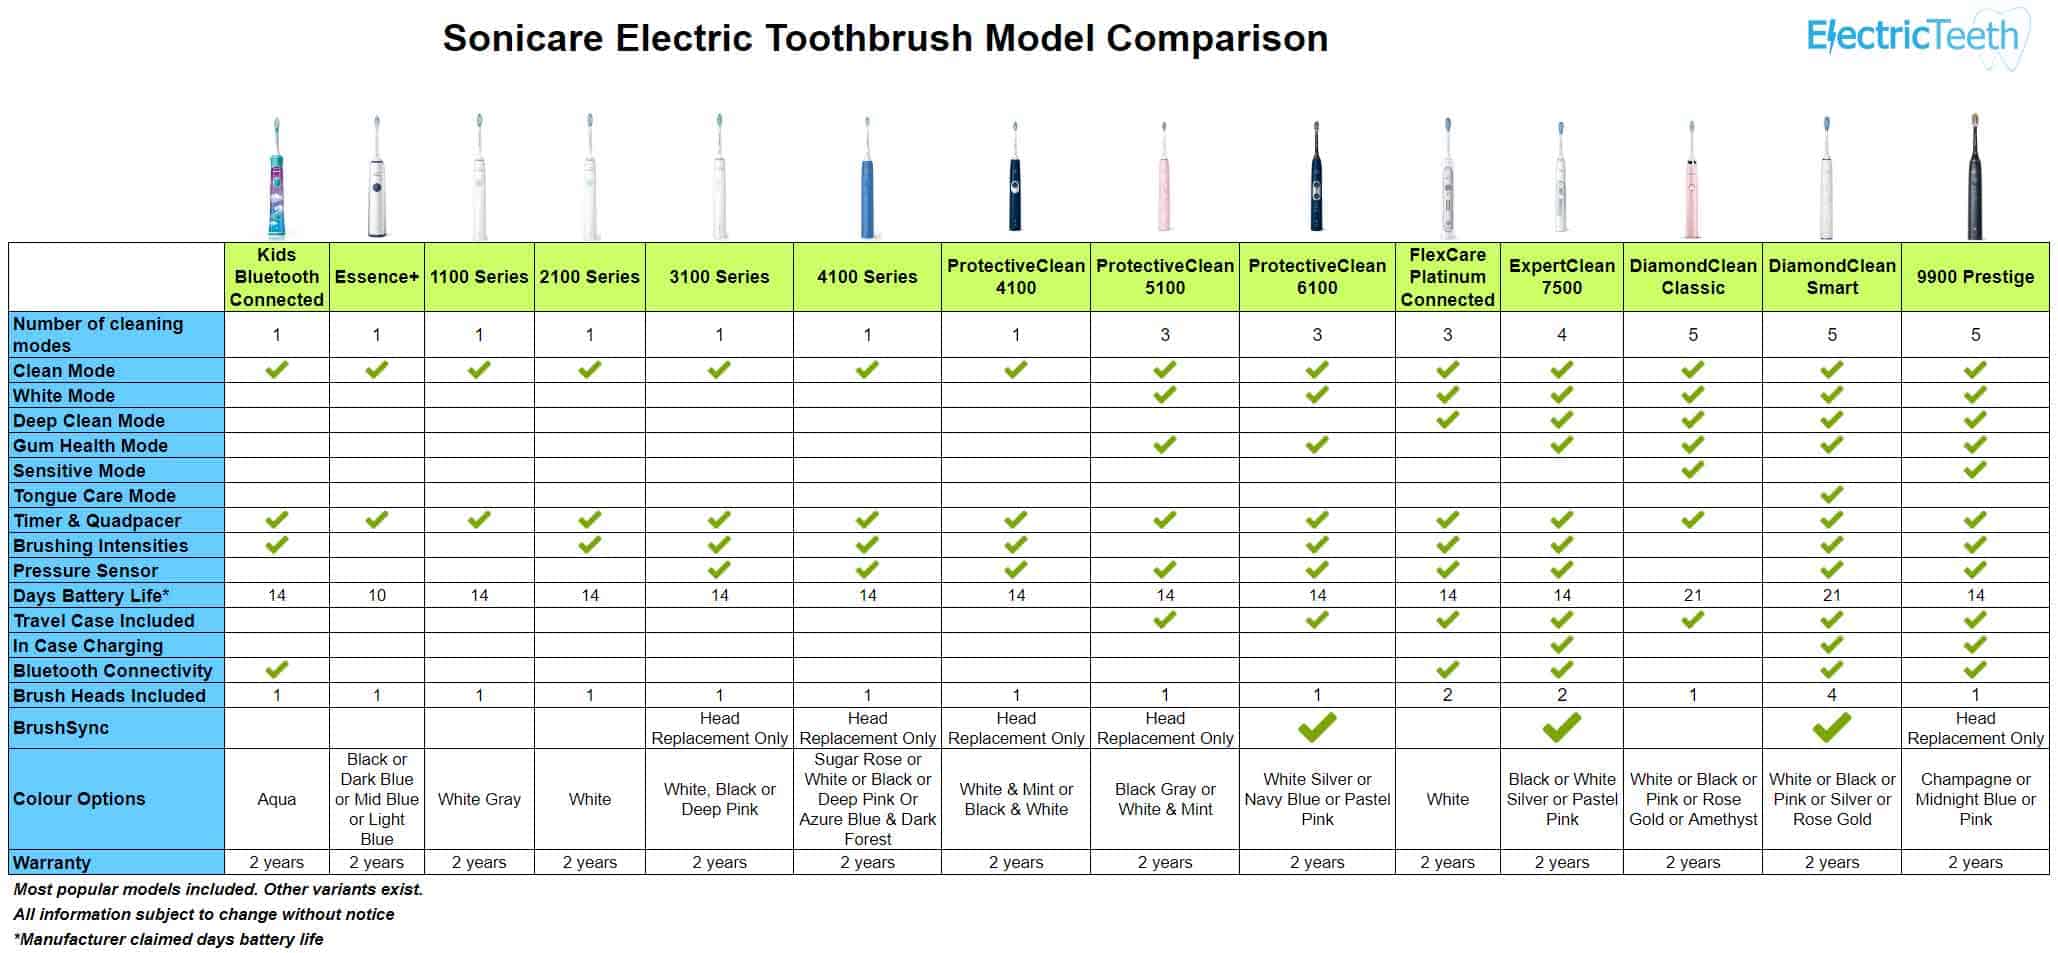 vocal abscess regain Sonicare Electric Toothbrush Comparison (Chart Included)